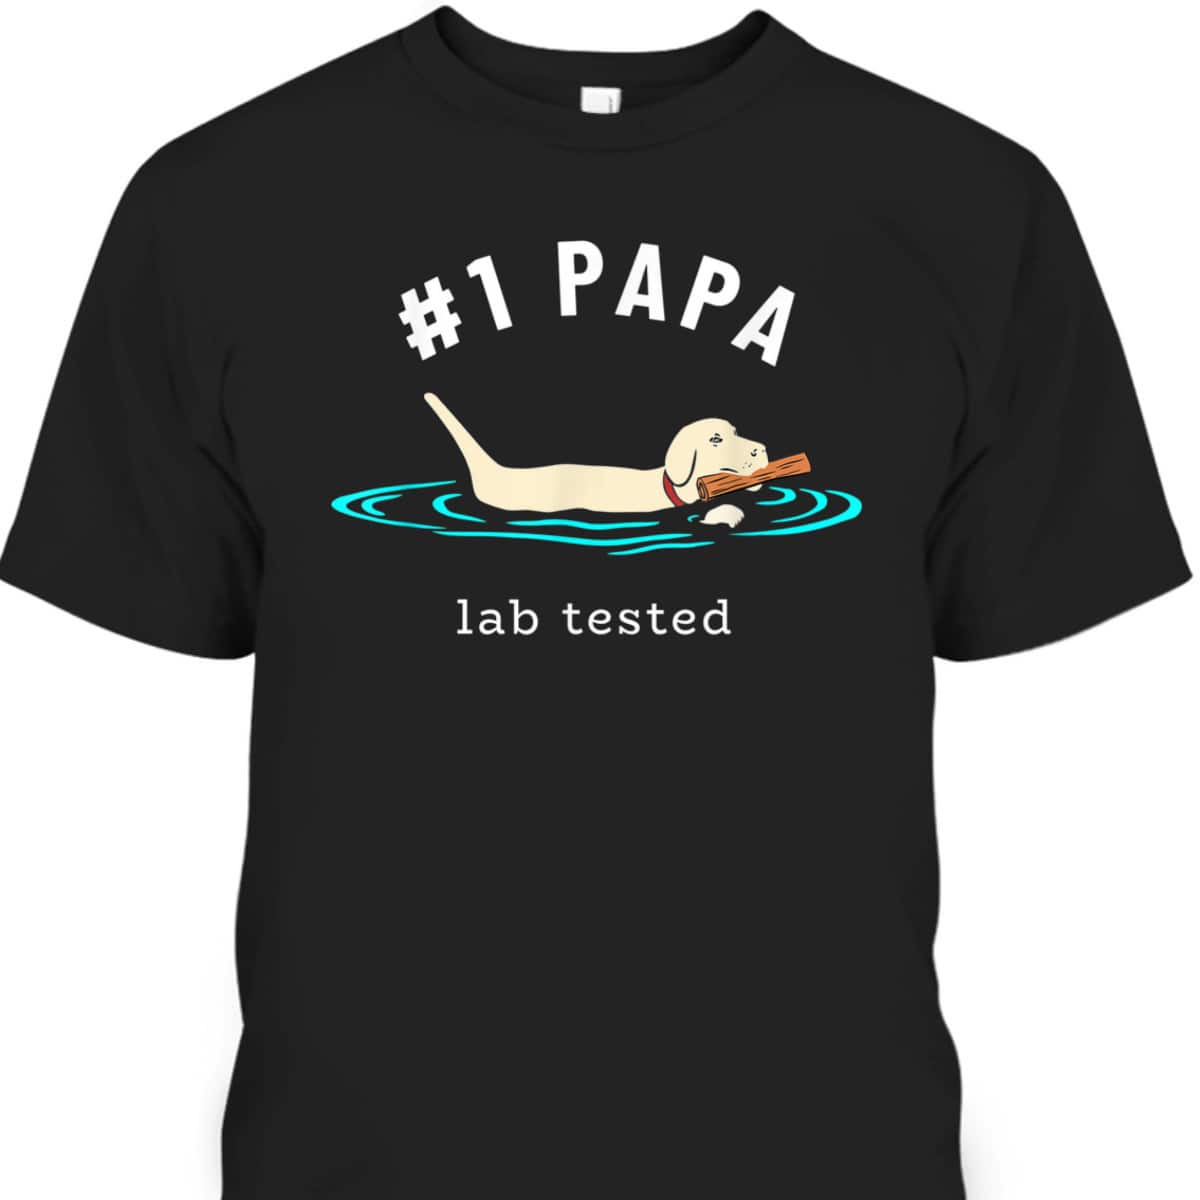 Father's Day T-Shirt #1 Papa Gift For Labrador Lovers